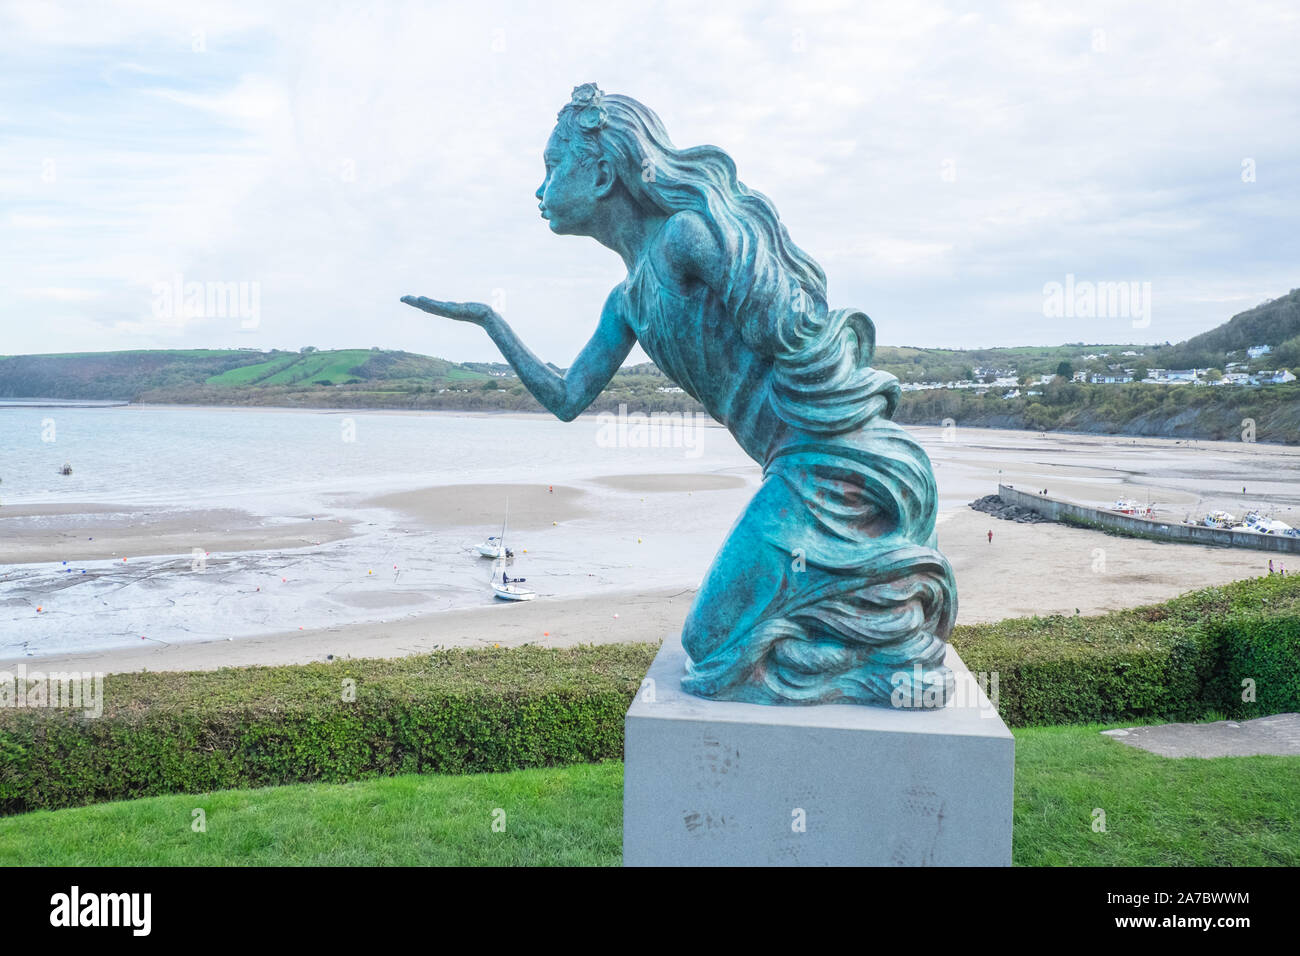 New,Statue,in,NewQuay,New Quay,Newquay,a,popular,fishing,coastal,village,town,popular,for,dolphin,watching,boat,trips,West Wales,Wales,Welsh,UK,GB, Stock Photo